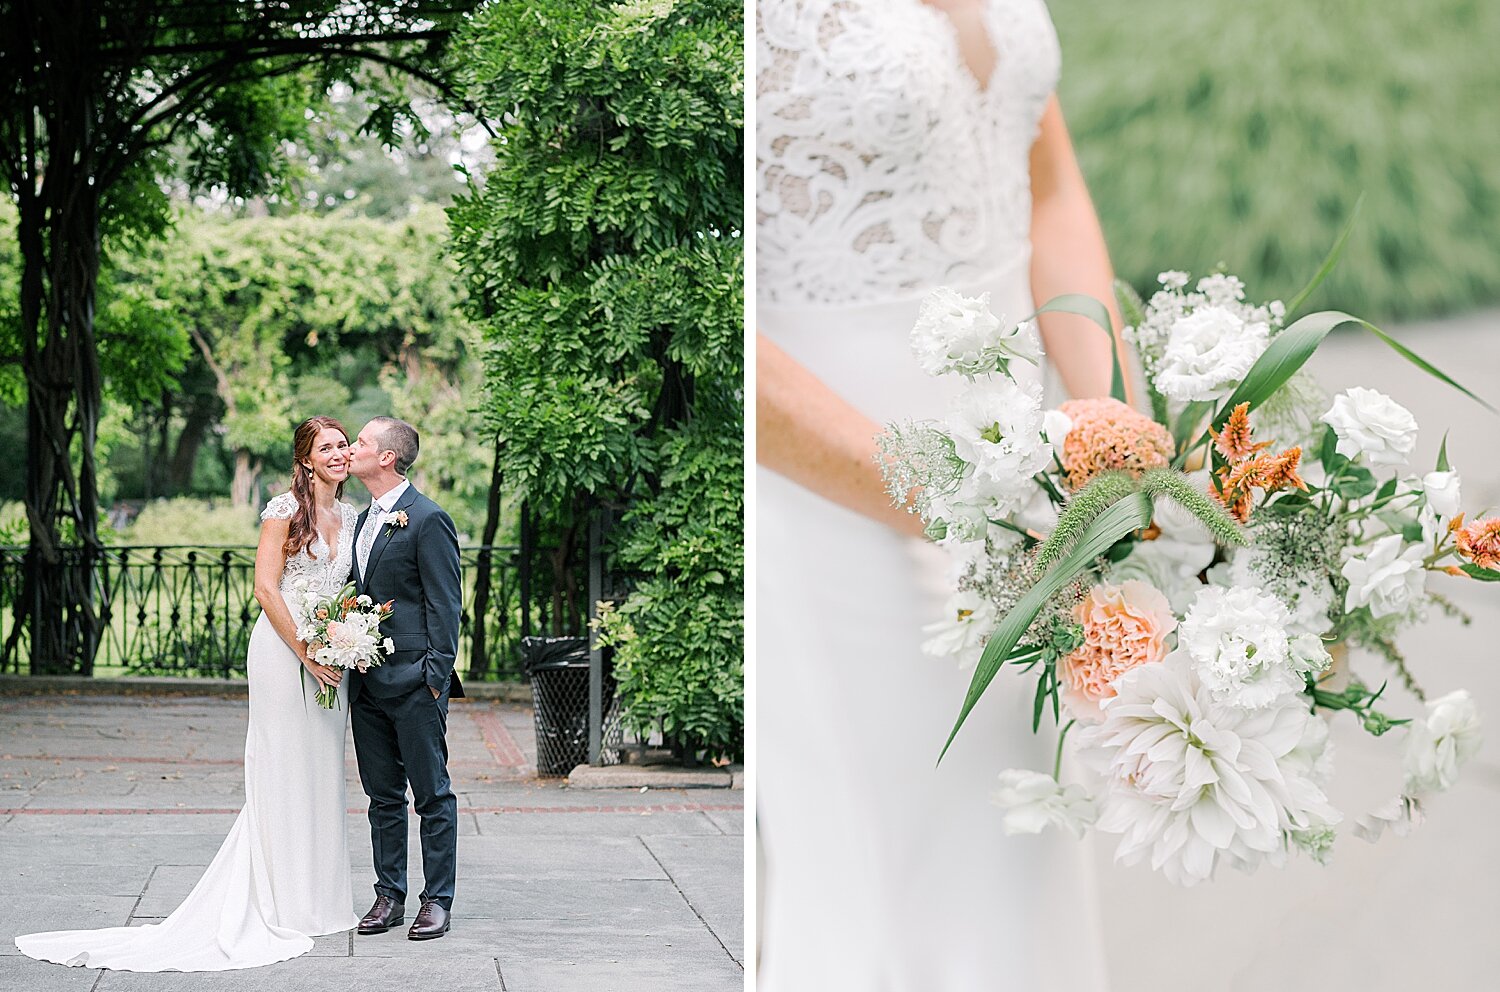 intimate NYC elopement in garden | Asher Gardner Photography | Elopement at the Central Park Conservatory Gardens